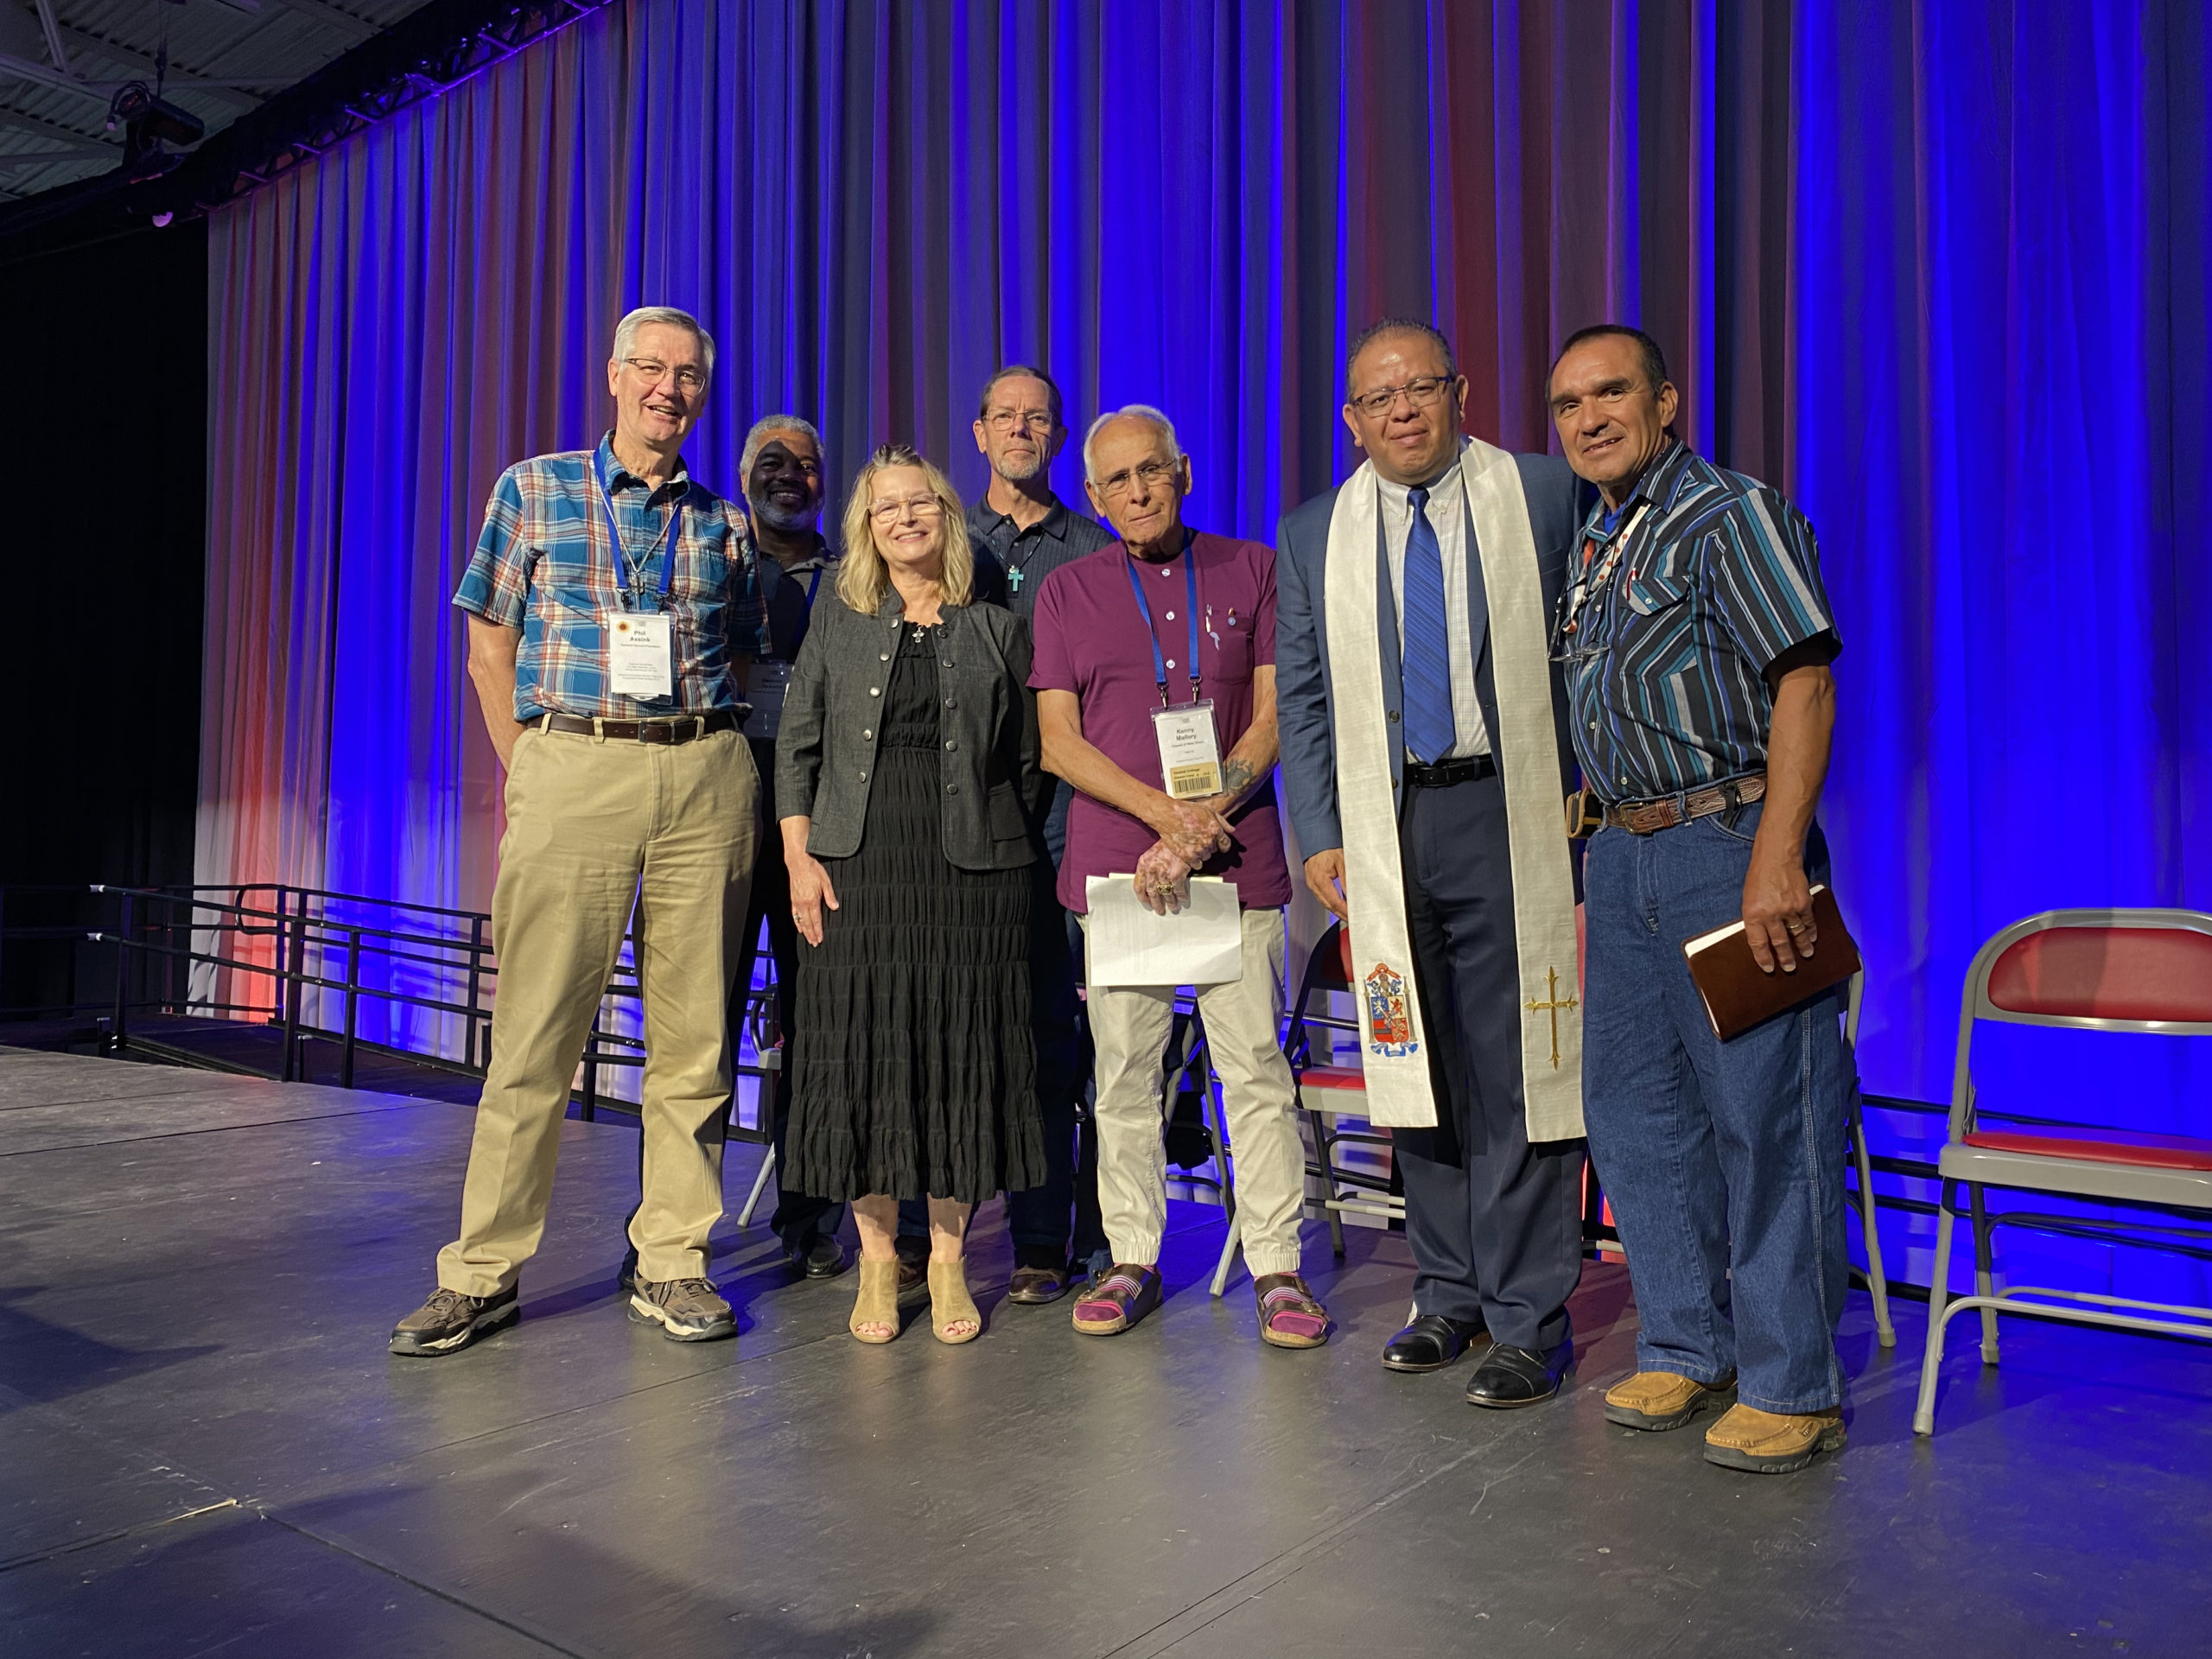 Native American church worship leaders with Eddy Aleman, Dwayne Jackson, and Phil Assink